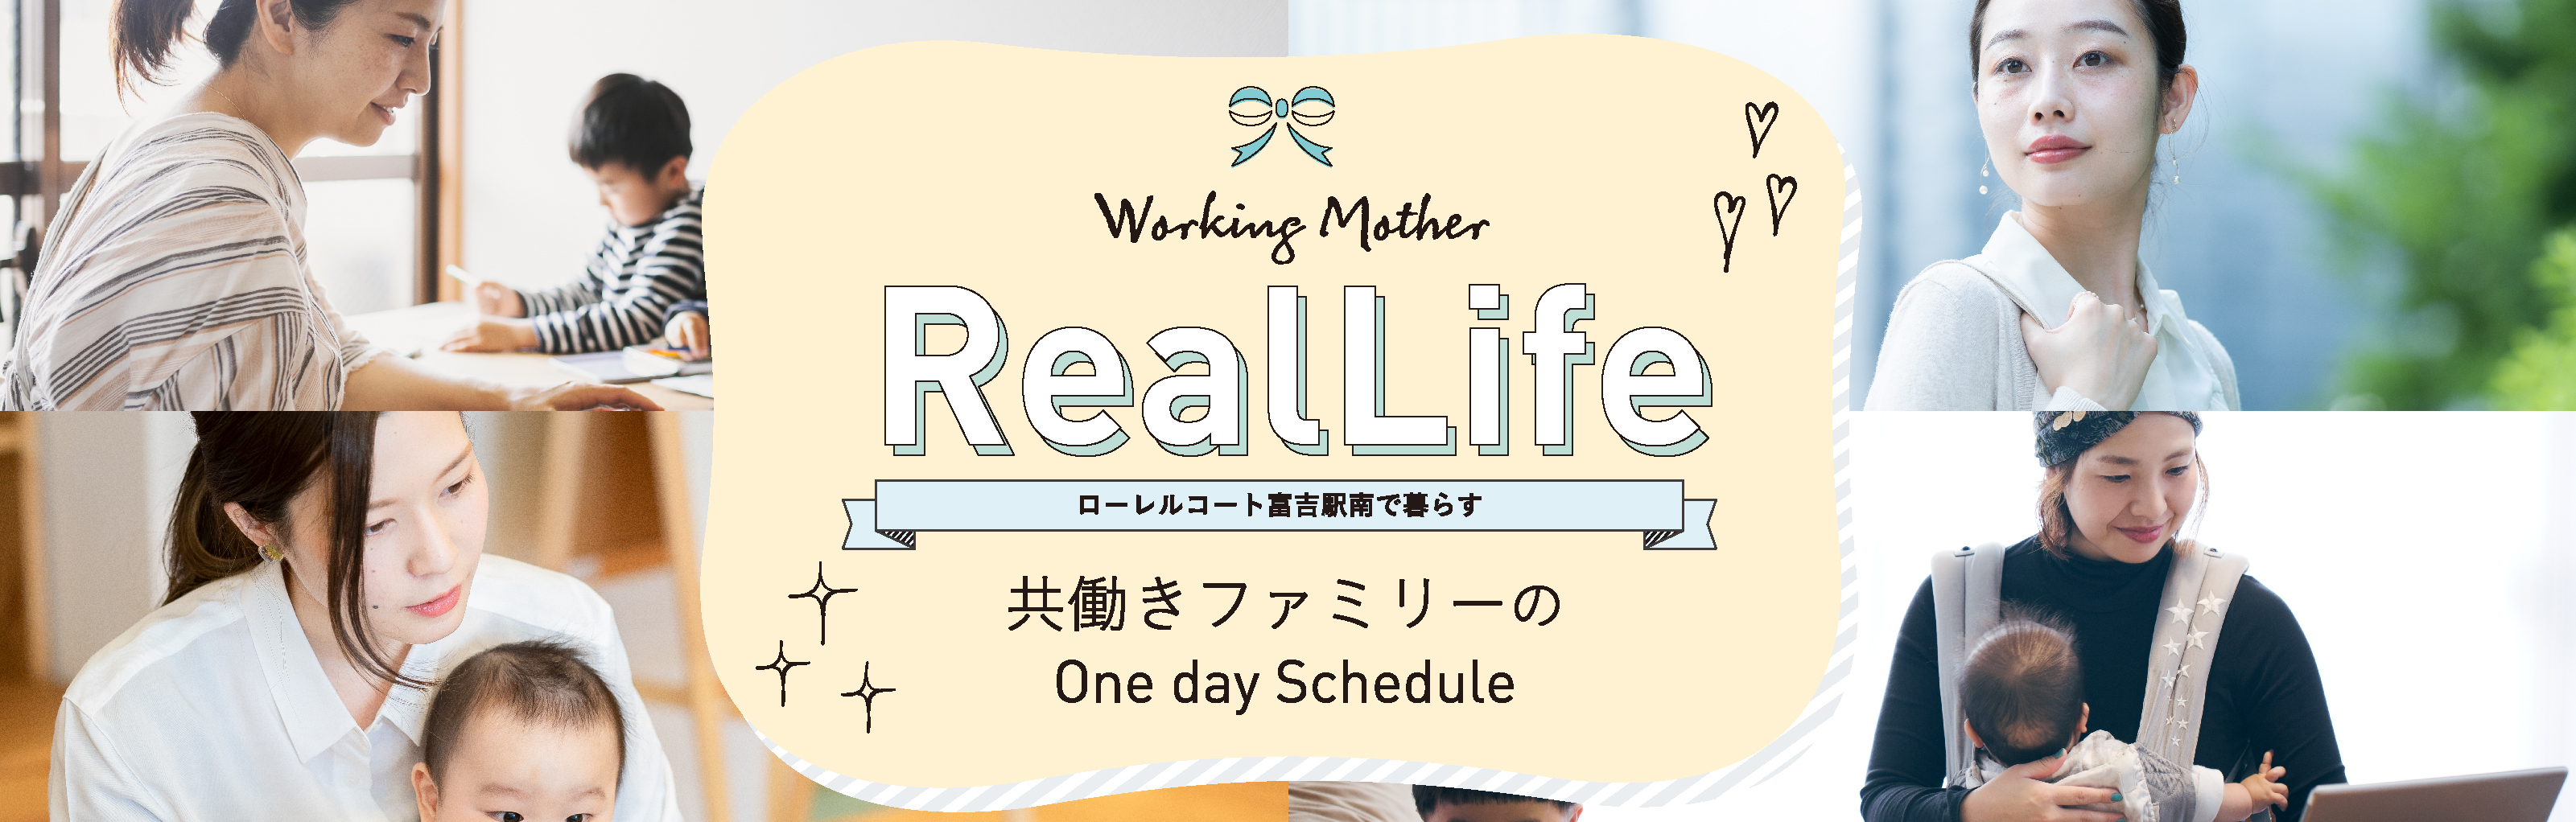 Working Mother Real Life　共働きファミリーのOne day Schedule